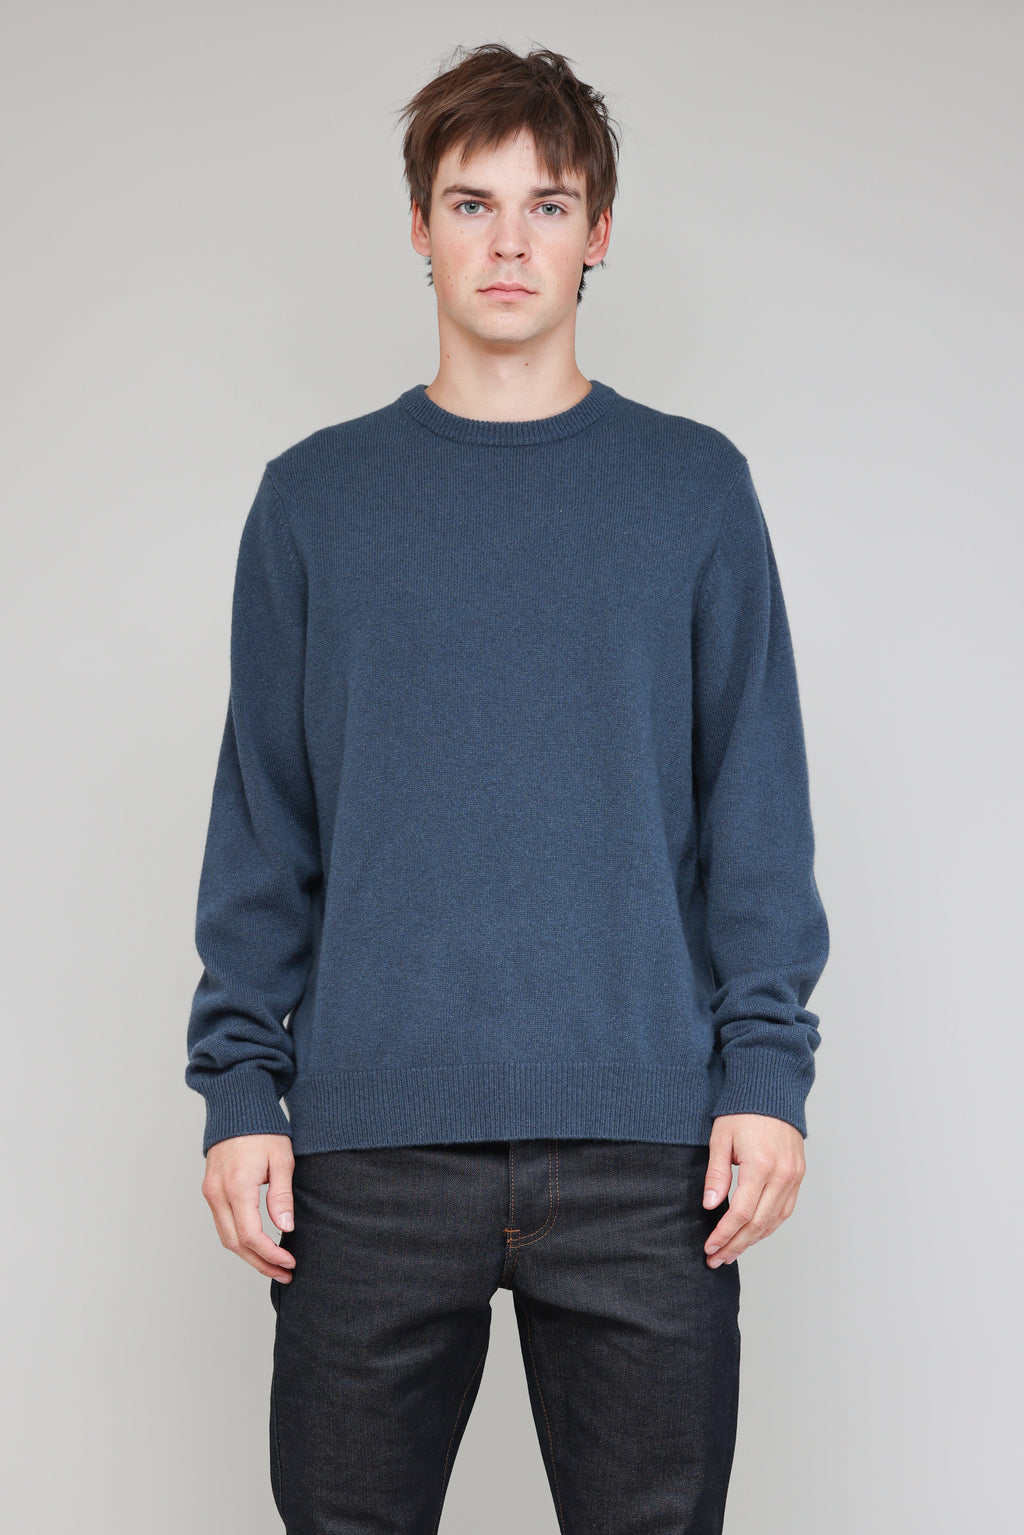 New Wool Crew in Blue 06